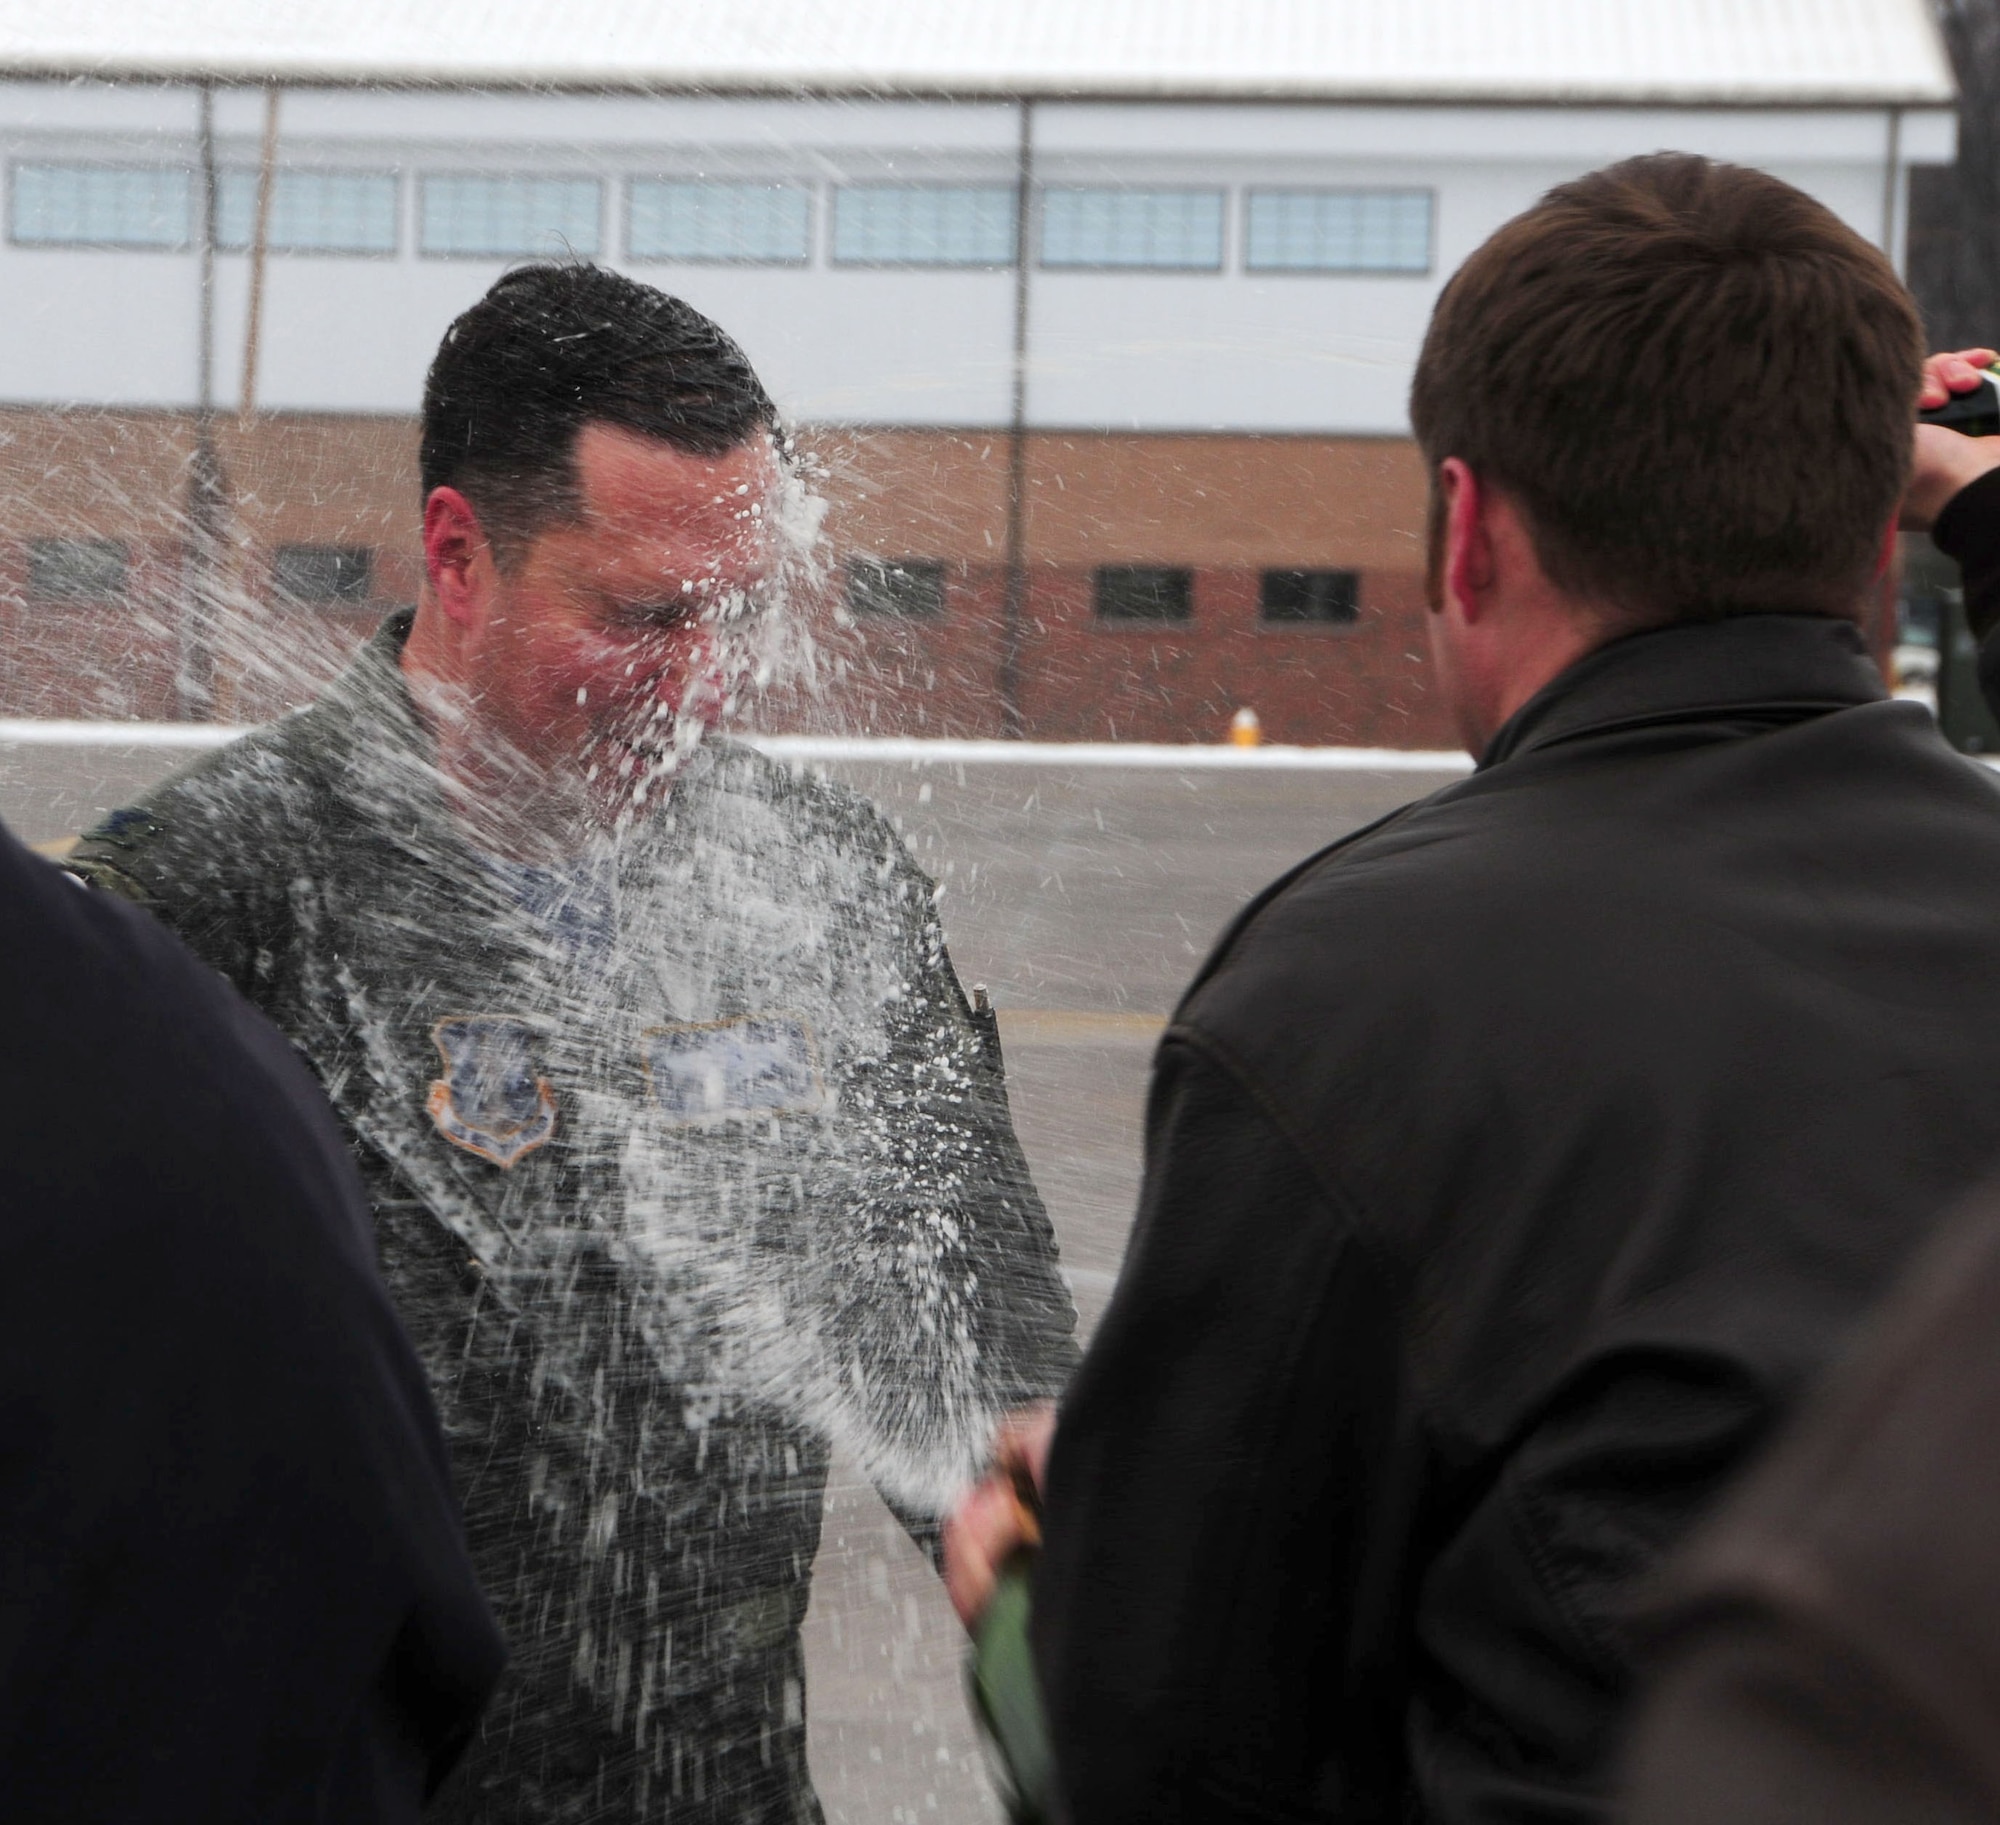 Col. Pete “Meat” Siana is greeted by the customary champagne dowsing following his “fini-flight” at Bradley Air National Guard Base in East Granby, Conn., March 3, 2012. Siana has flown for more than 23 years with the United States Air Force and has logged more than 4,000 military flying hours. (U.S. Air Force photo by Airman 1st Class Emmanuel Santiago)